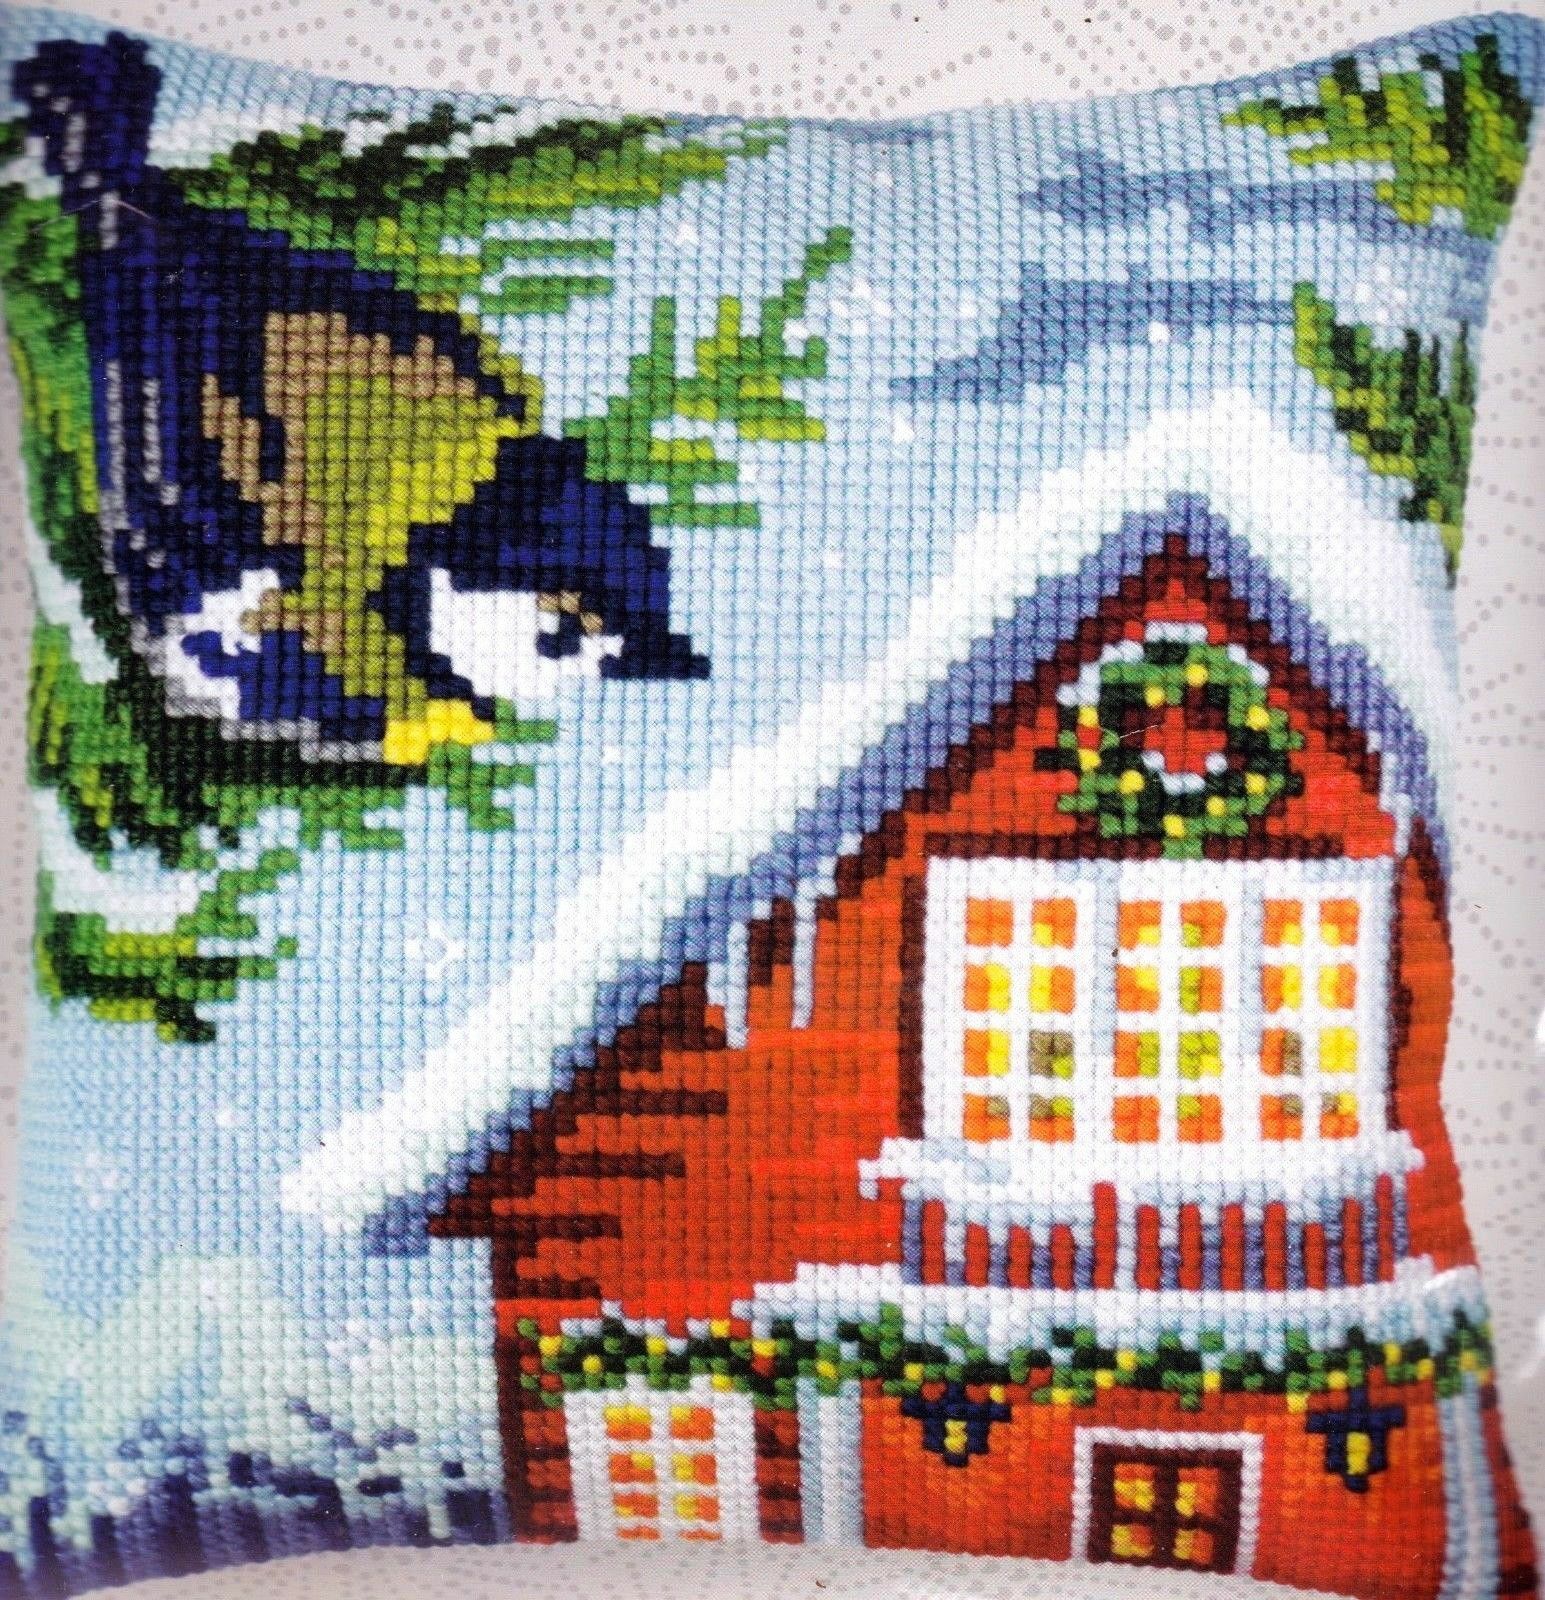 DIY Collection D'Art Before Christmas Chunky Needlepoint 16